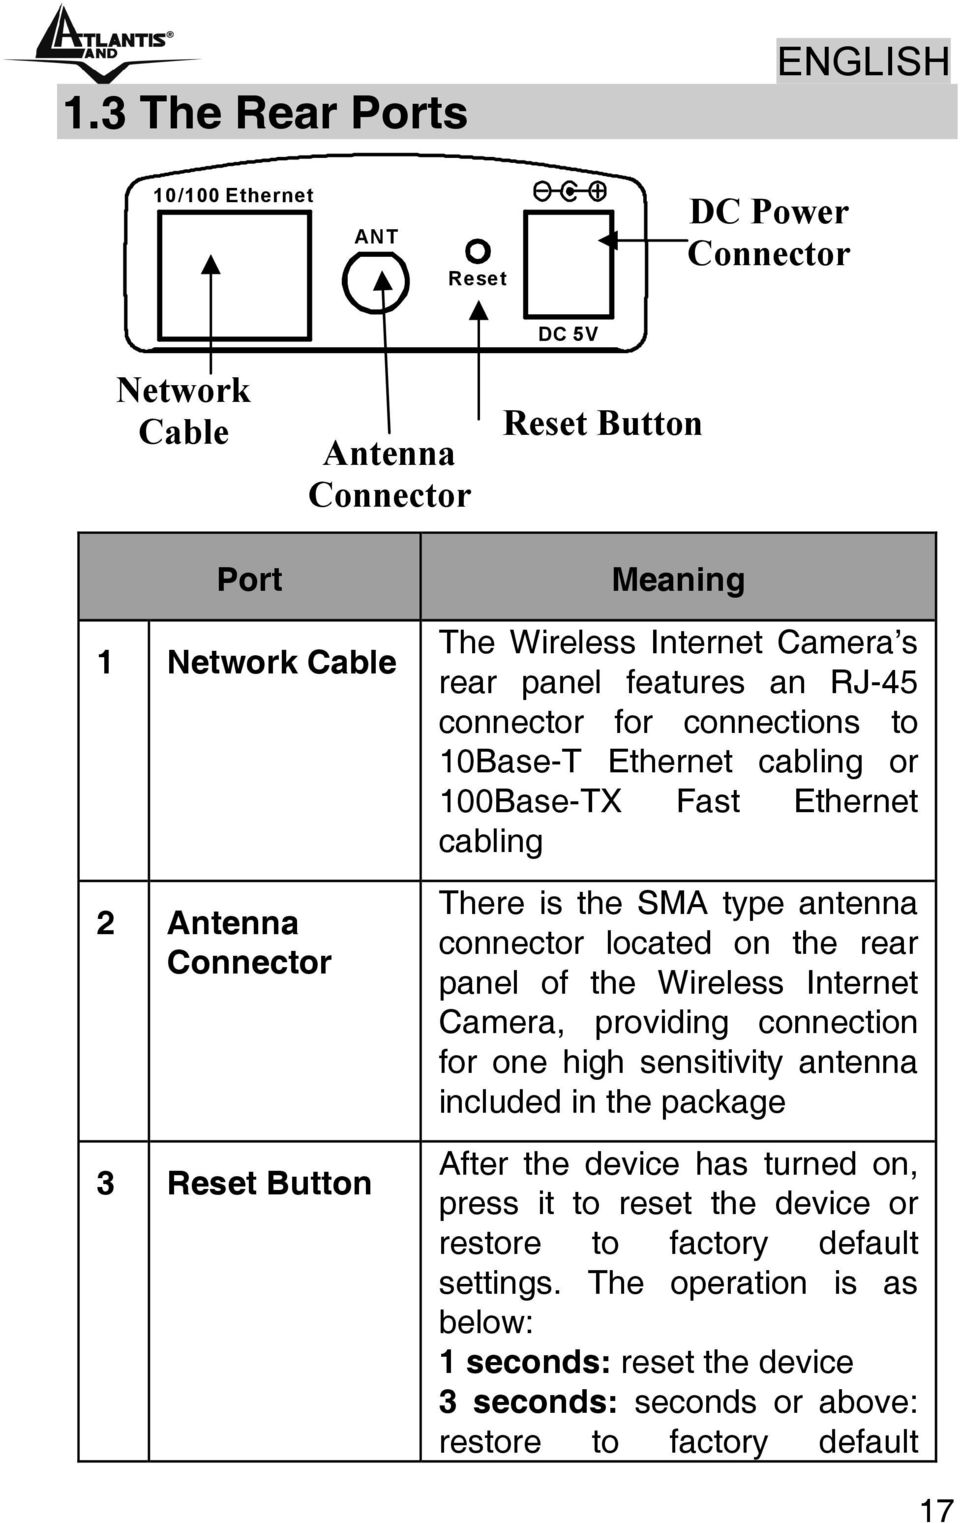 antenna connector located on the rear panel of the Wireless Internet Camera, providing connection for one high sensitivity antenna included in the package After the device has turned